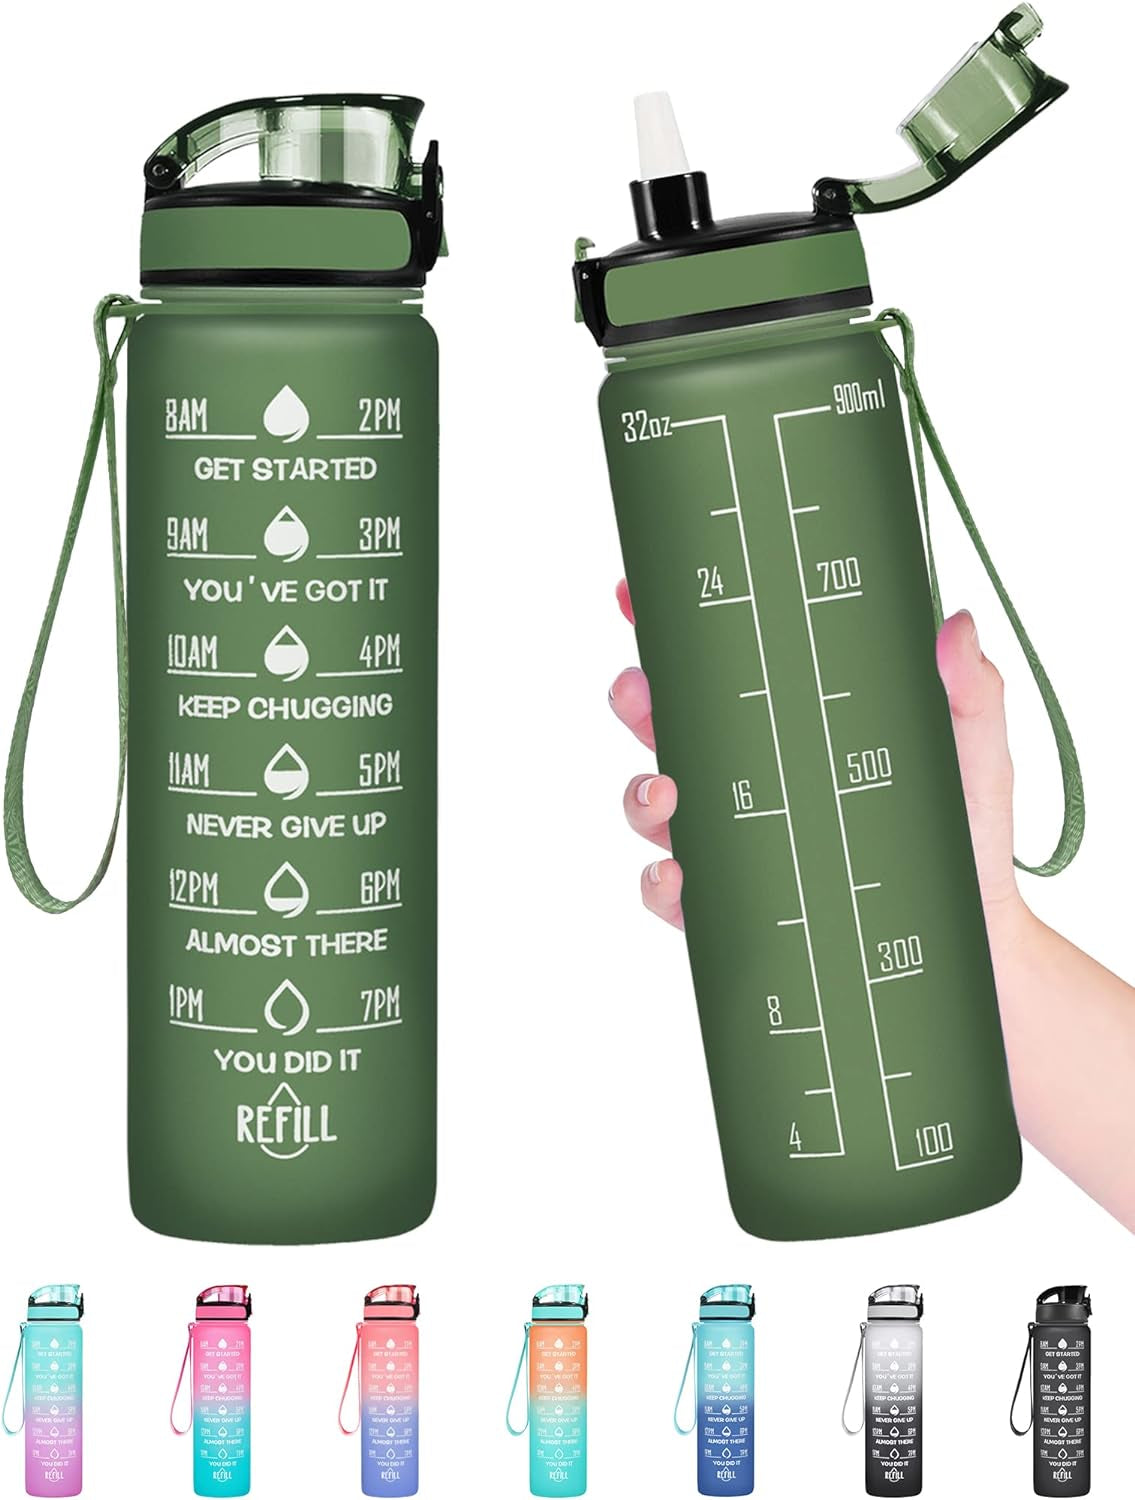 32 Oz Water Bottle, Leakproof BPA & Toxic Free, Motivational Water Bottle with Times to Drink and Straw, Fitness Sports Water Bottle with Strap for Office, Gym, Outdoor Sports, Gray-Black